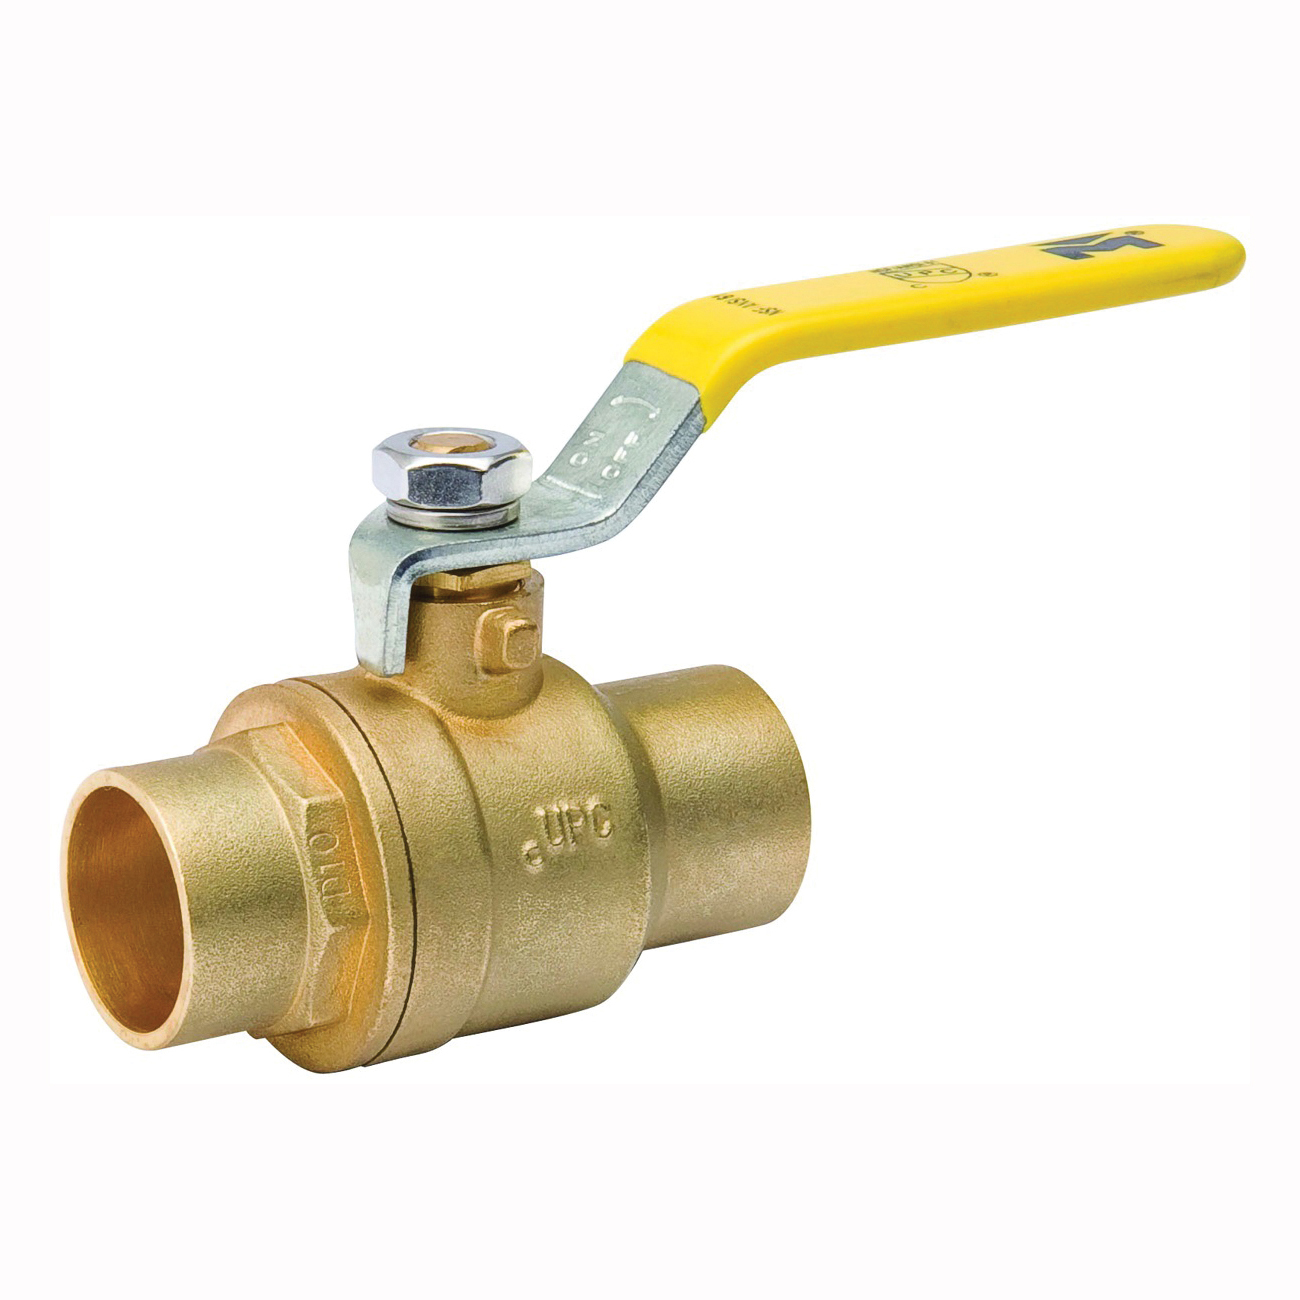 107-843NL Ball Valve, 1/2 in Connection, Compression, 600/150 psi Pressure, Manual Actuator, Brass Body